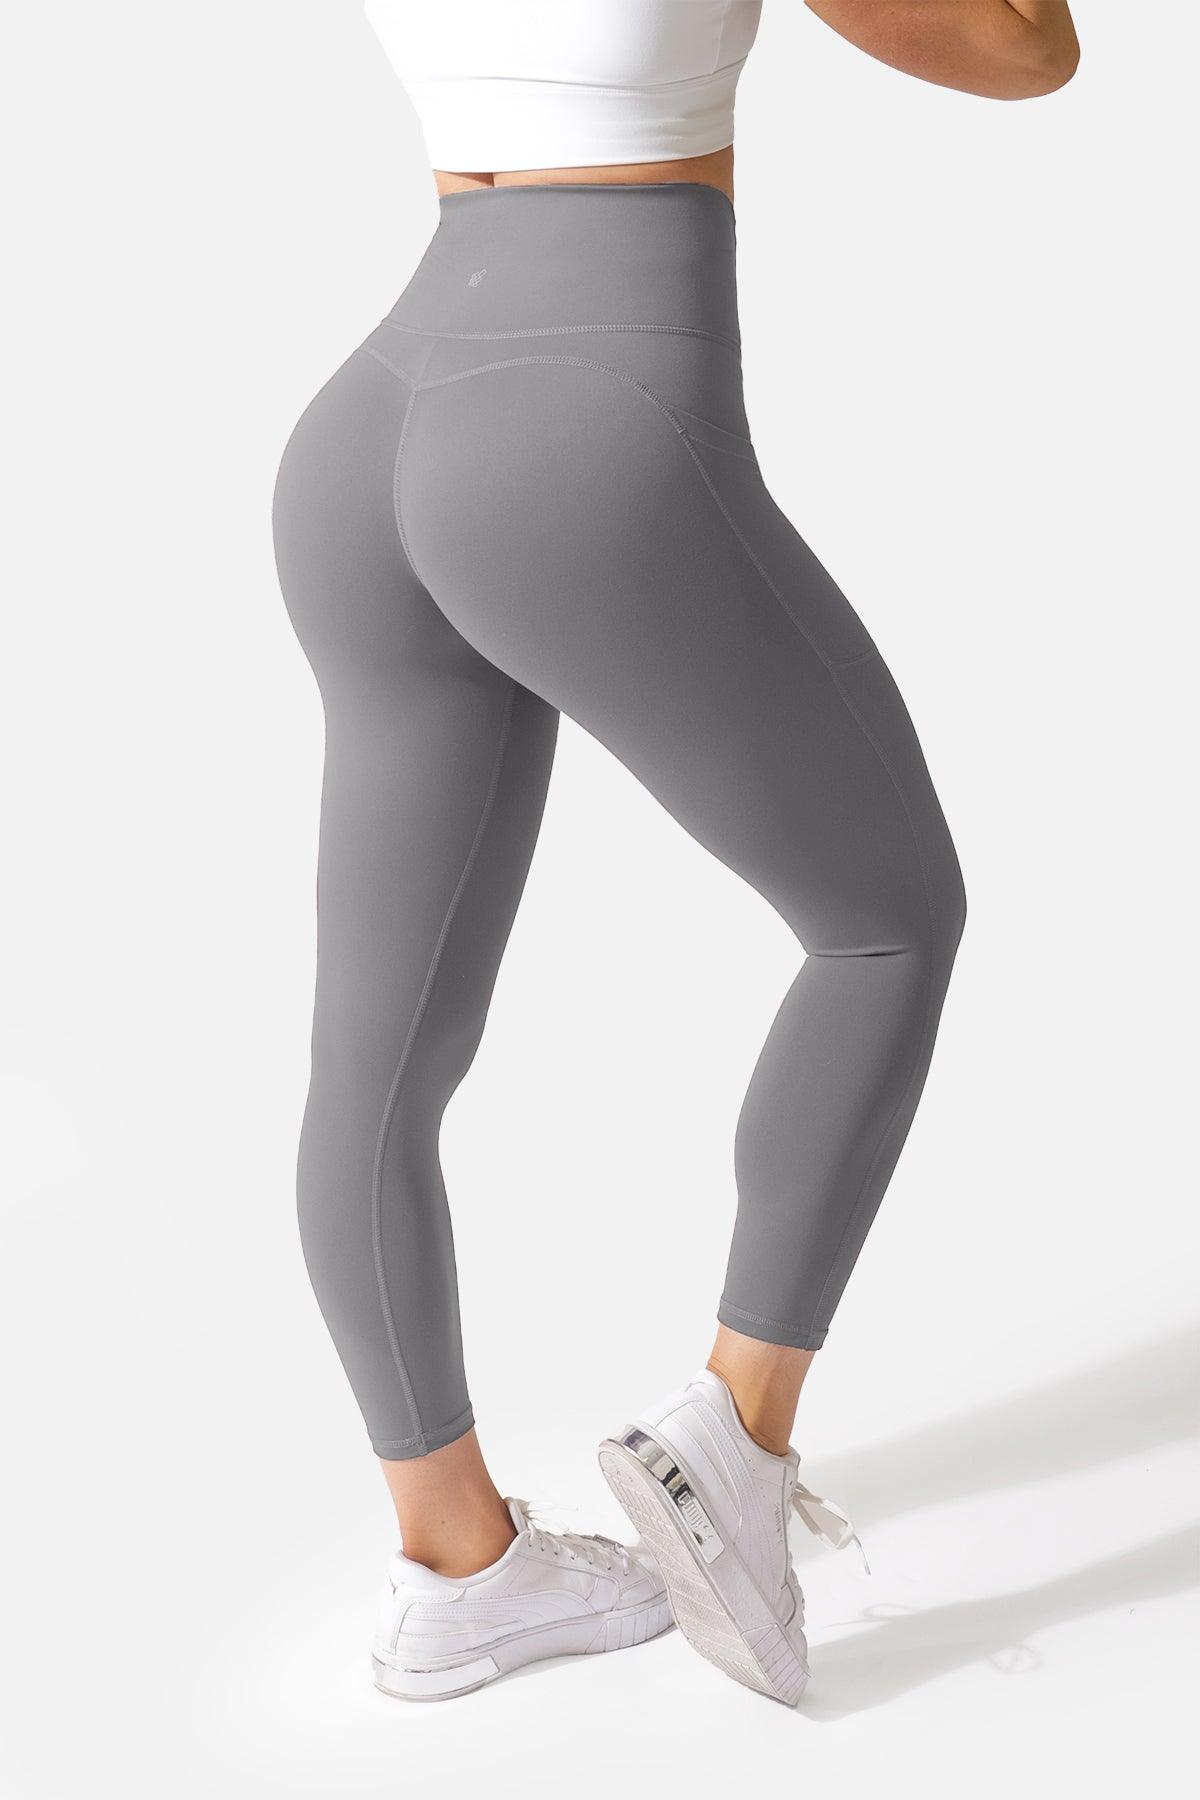 Women Stretchable Spandex Gym Leggings Tights with Side Zip Pocket - Grey  Military - S